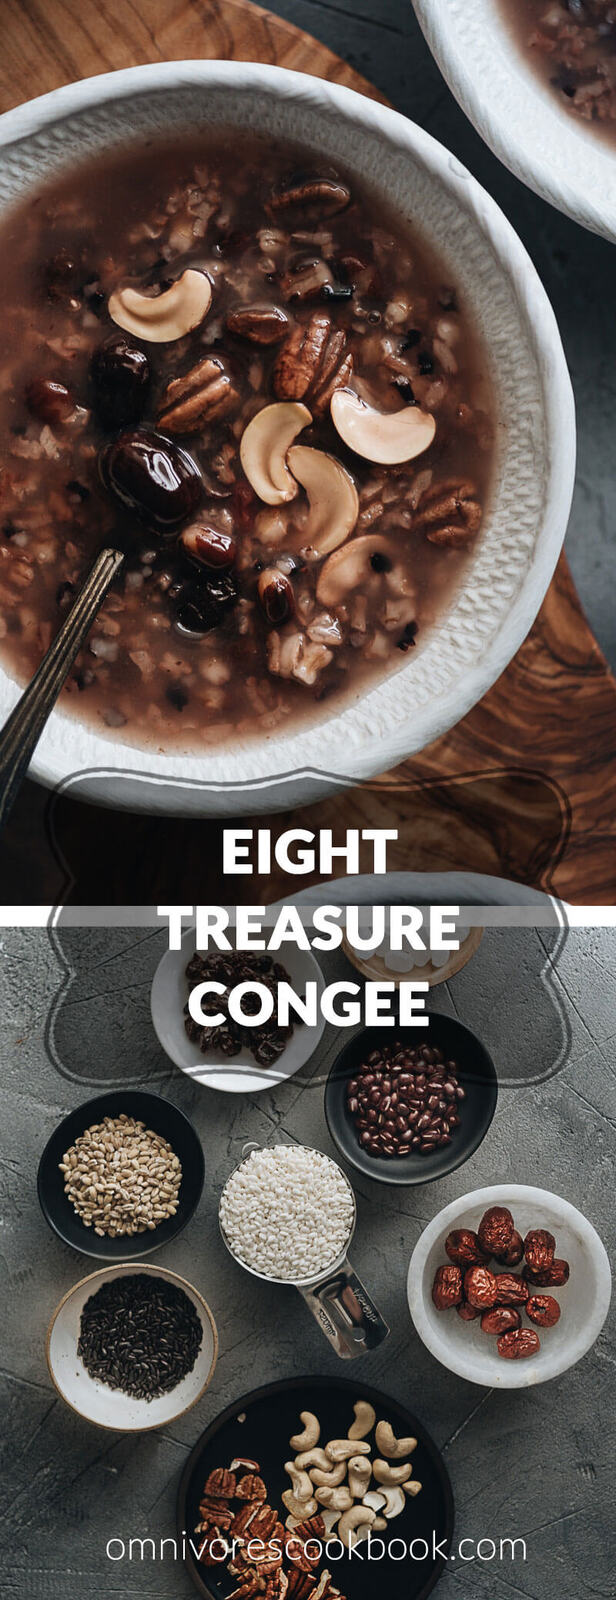 Eight Treasure Congee - Made with whole grains, nuts, and dried fruits, it’s nutritious, comforting, and easy to make. It’s a perfect side for a weekday dinner and it tastes as good as a dessert. Both stovetop and Instant Pot versions are included. #glutenfree #vegan